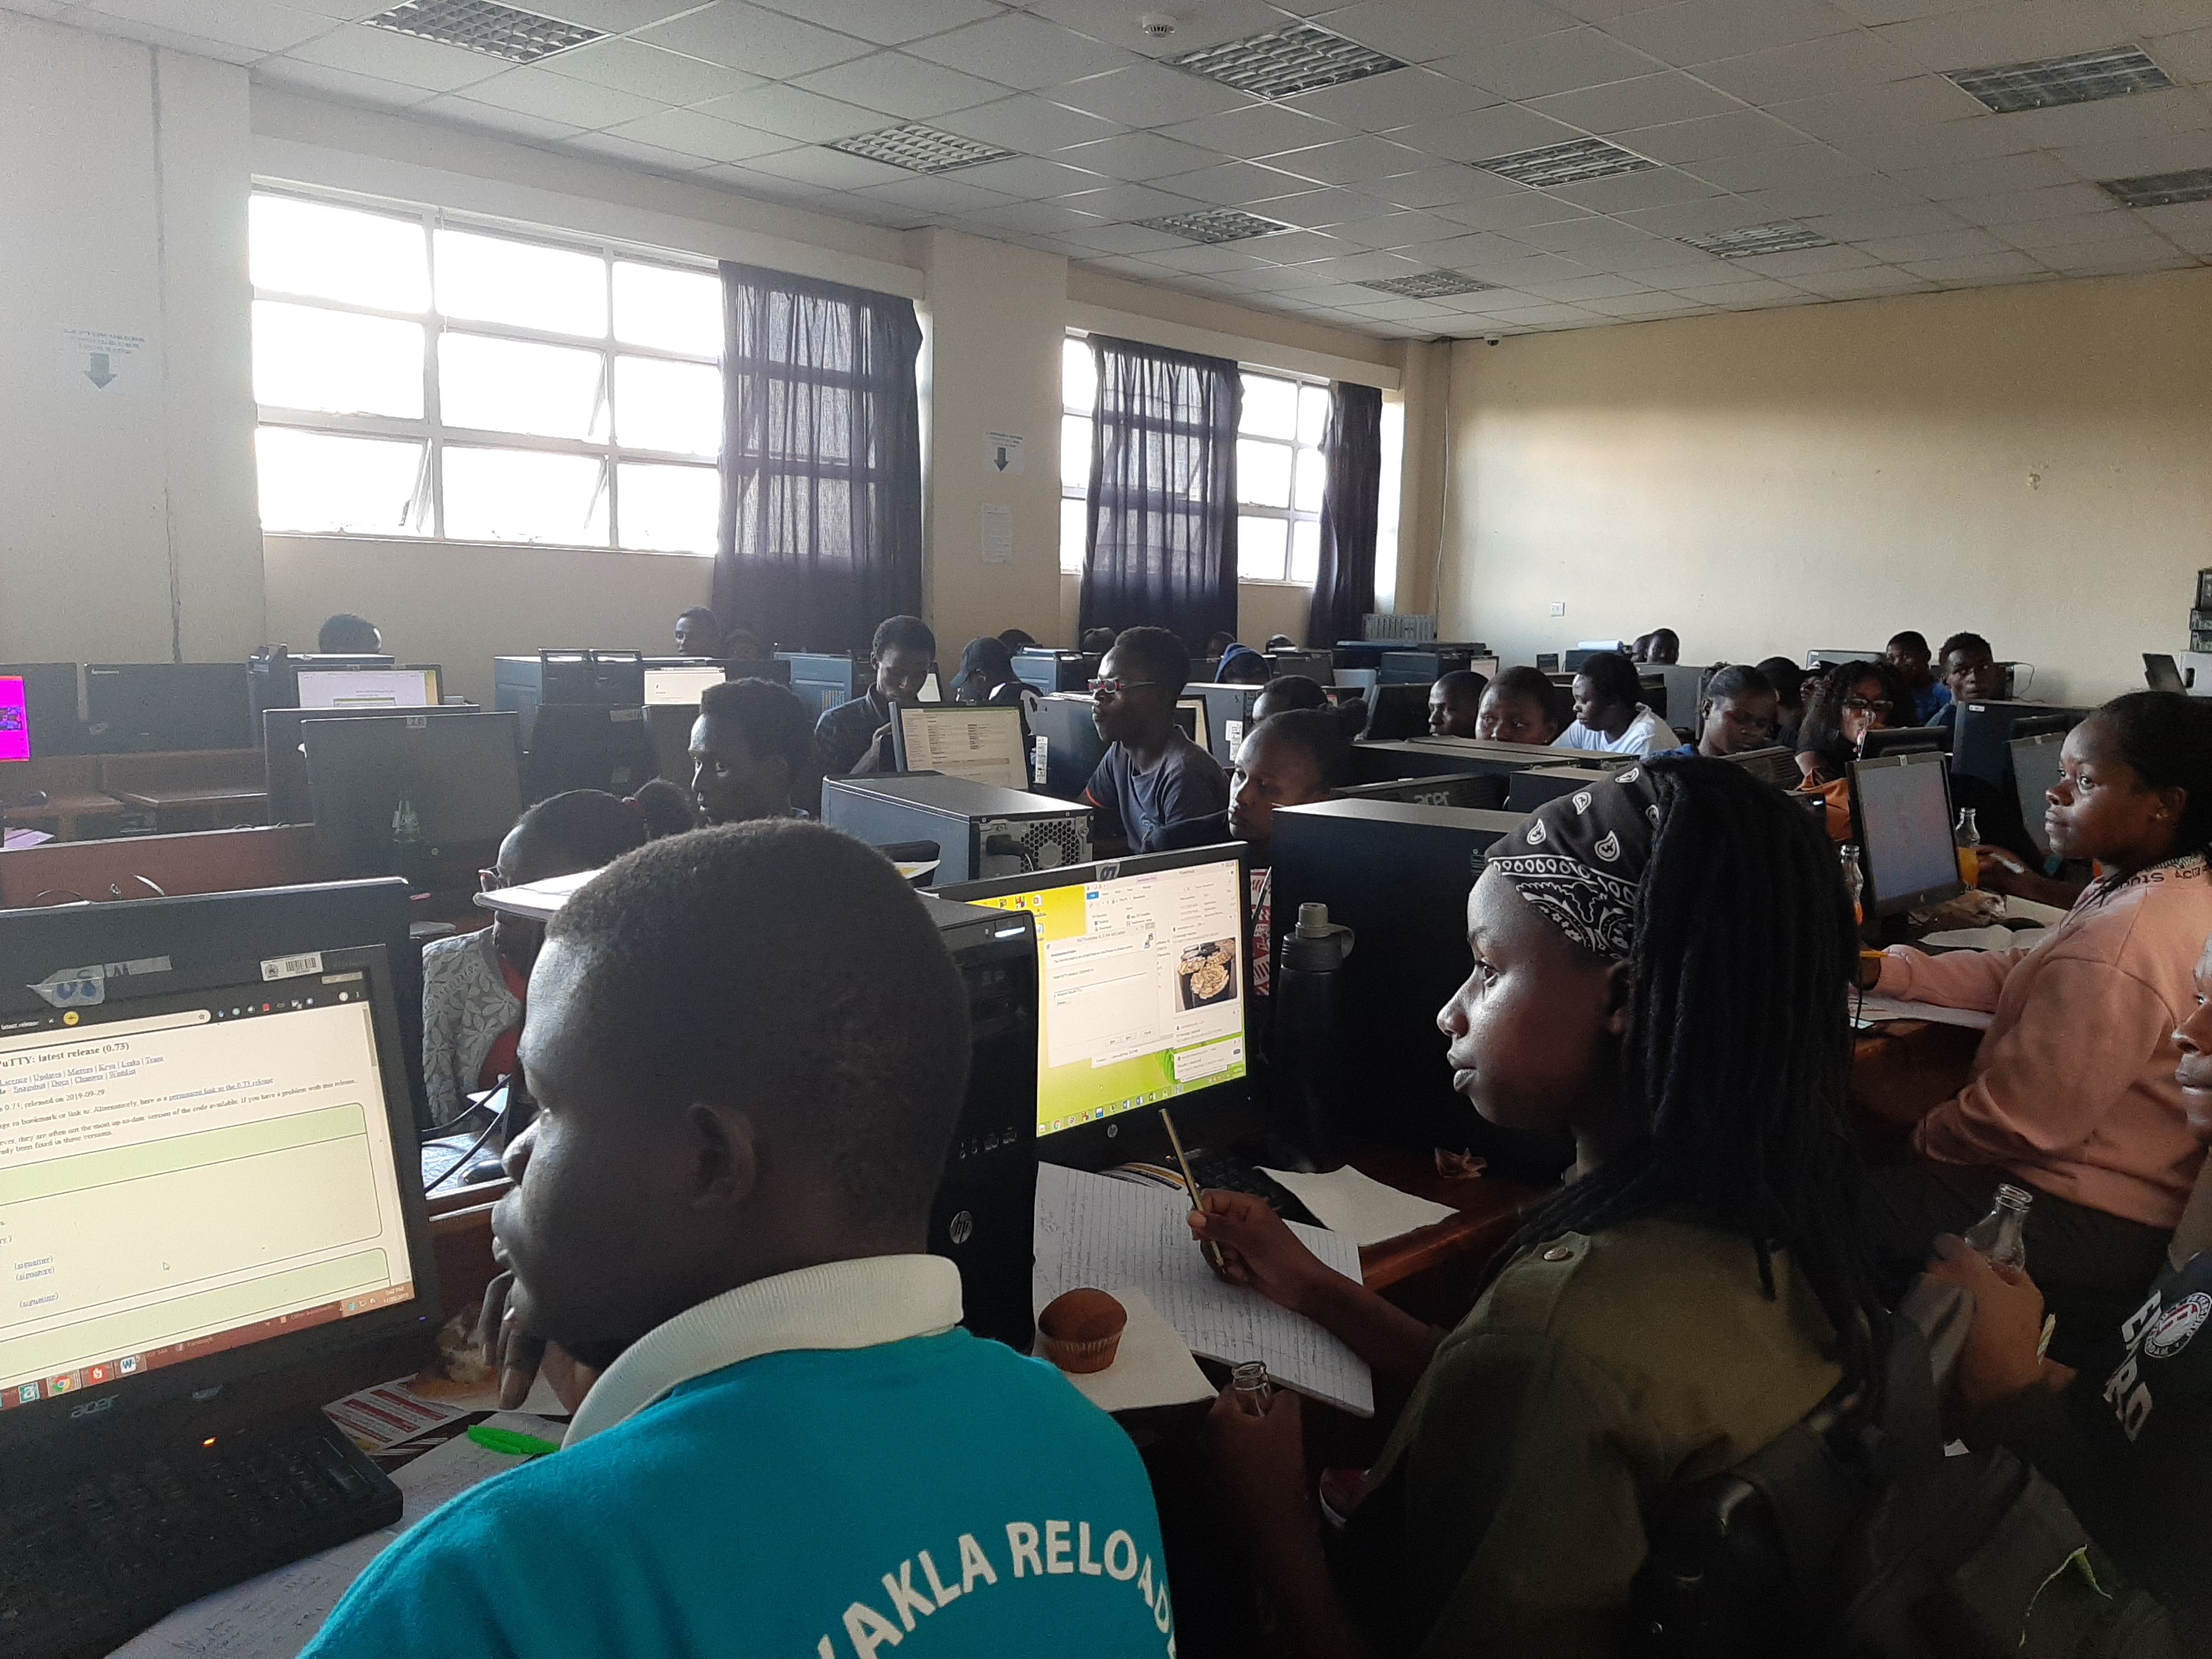 LINUX LEARNING CENTRE LTD CONDUCTING LPIC 1 LINUX SYSTEM ADMINISTRATION TRAINING AT COOPERATIVE UNIVERSITY OF KENYA (CUK) - NOVEMBER 2019